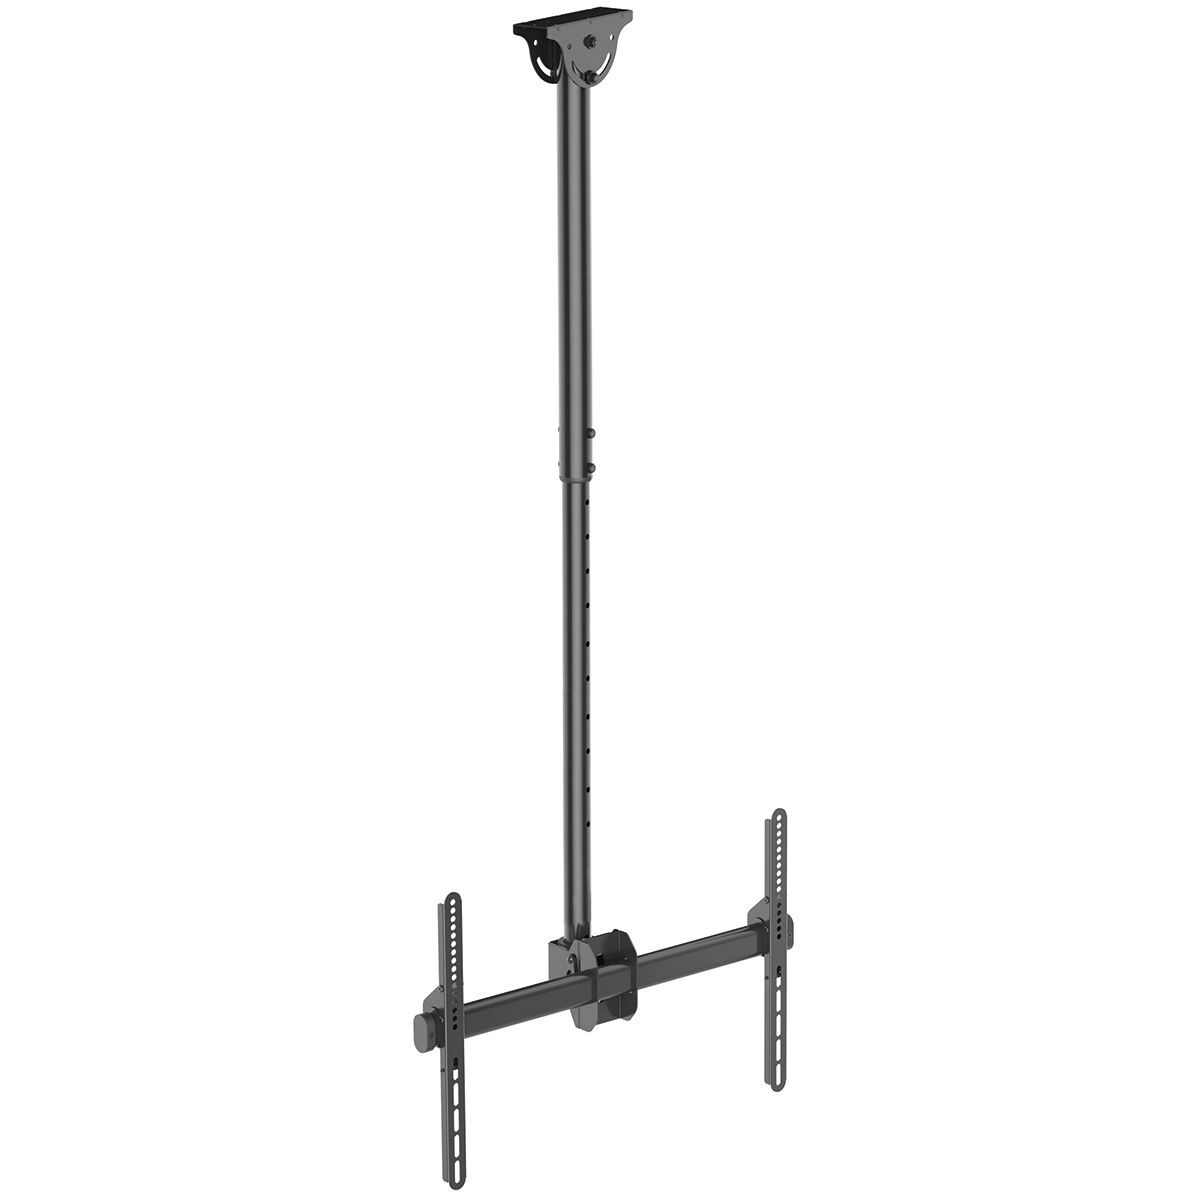 StarTech.com Ceiling Mounting Monitor Arm for 1 x Screen, 75in Screen Size